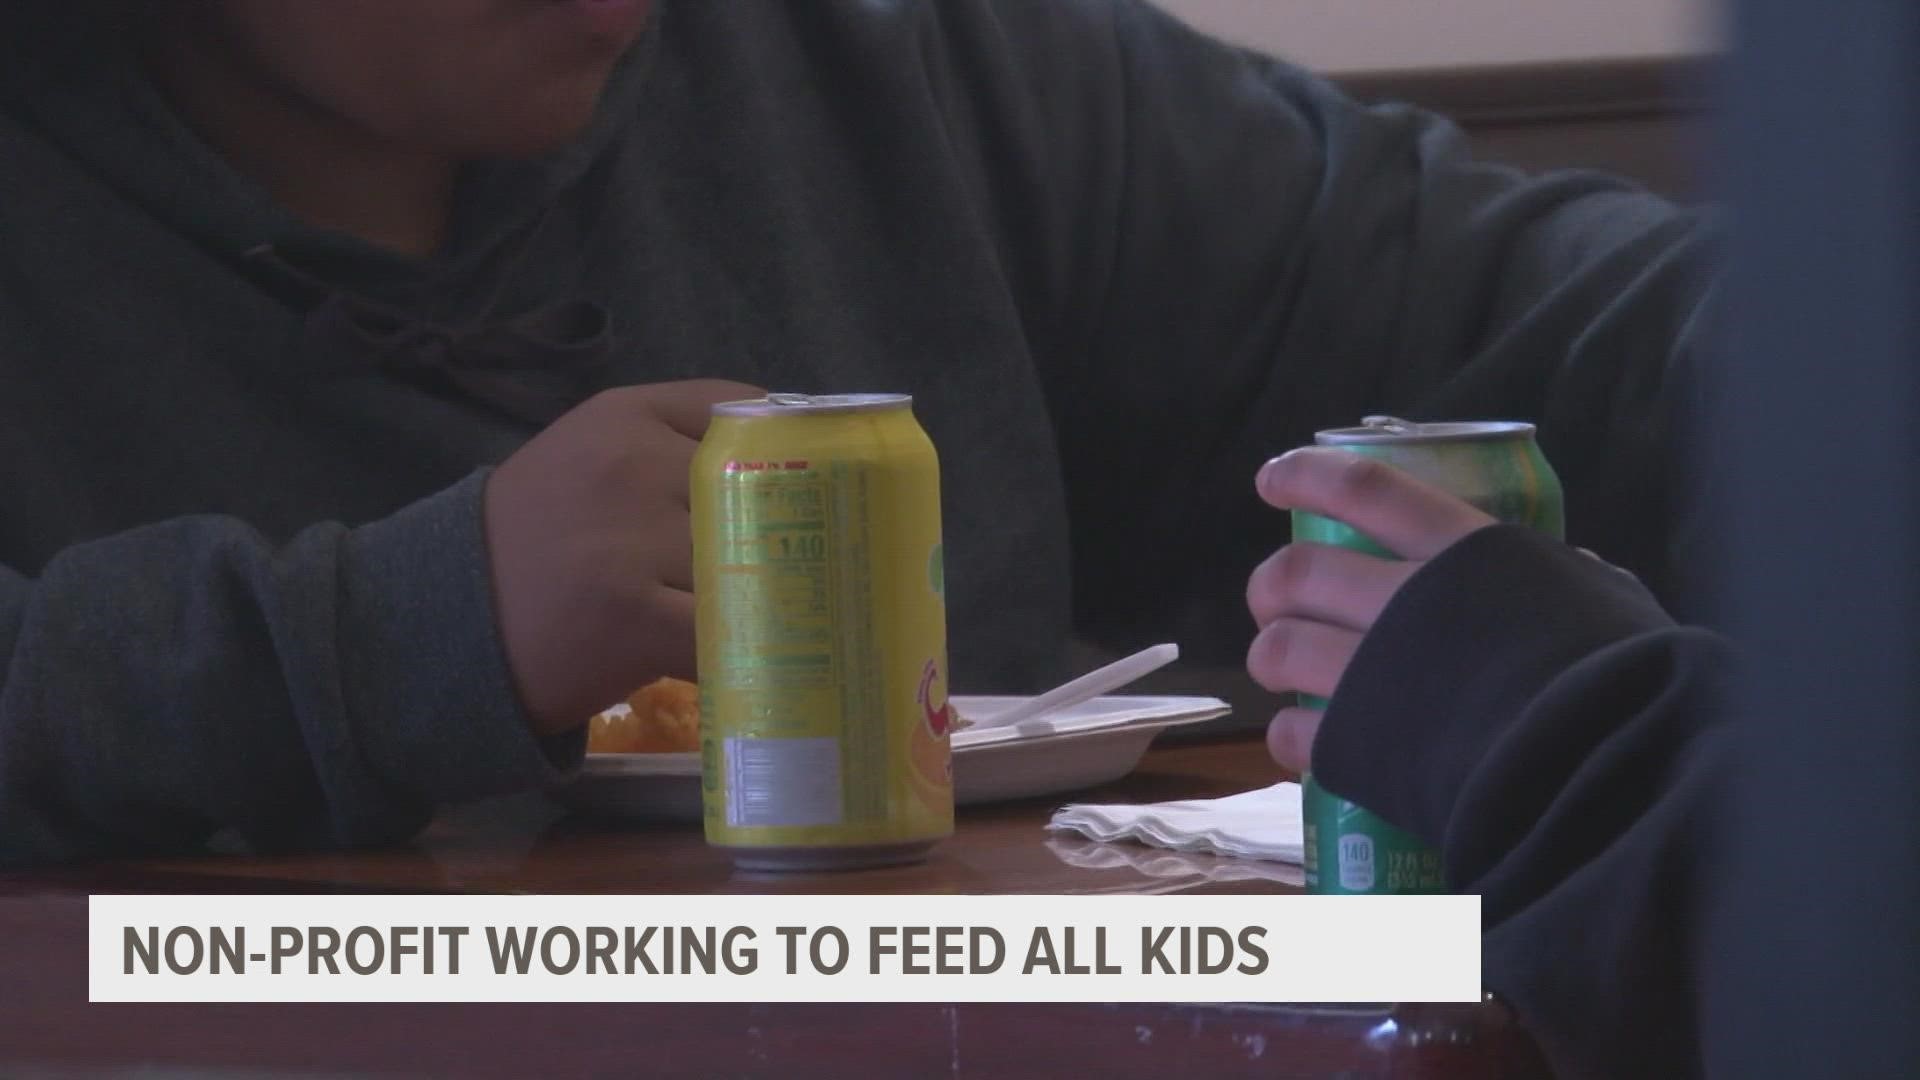 Newly formed non-profit 4 All Kids is working to keep children fed and have hot meals.